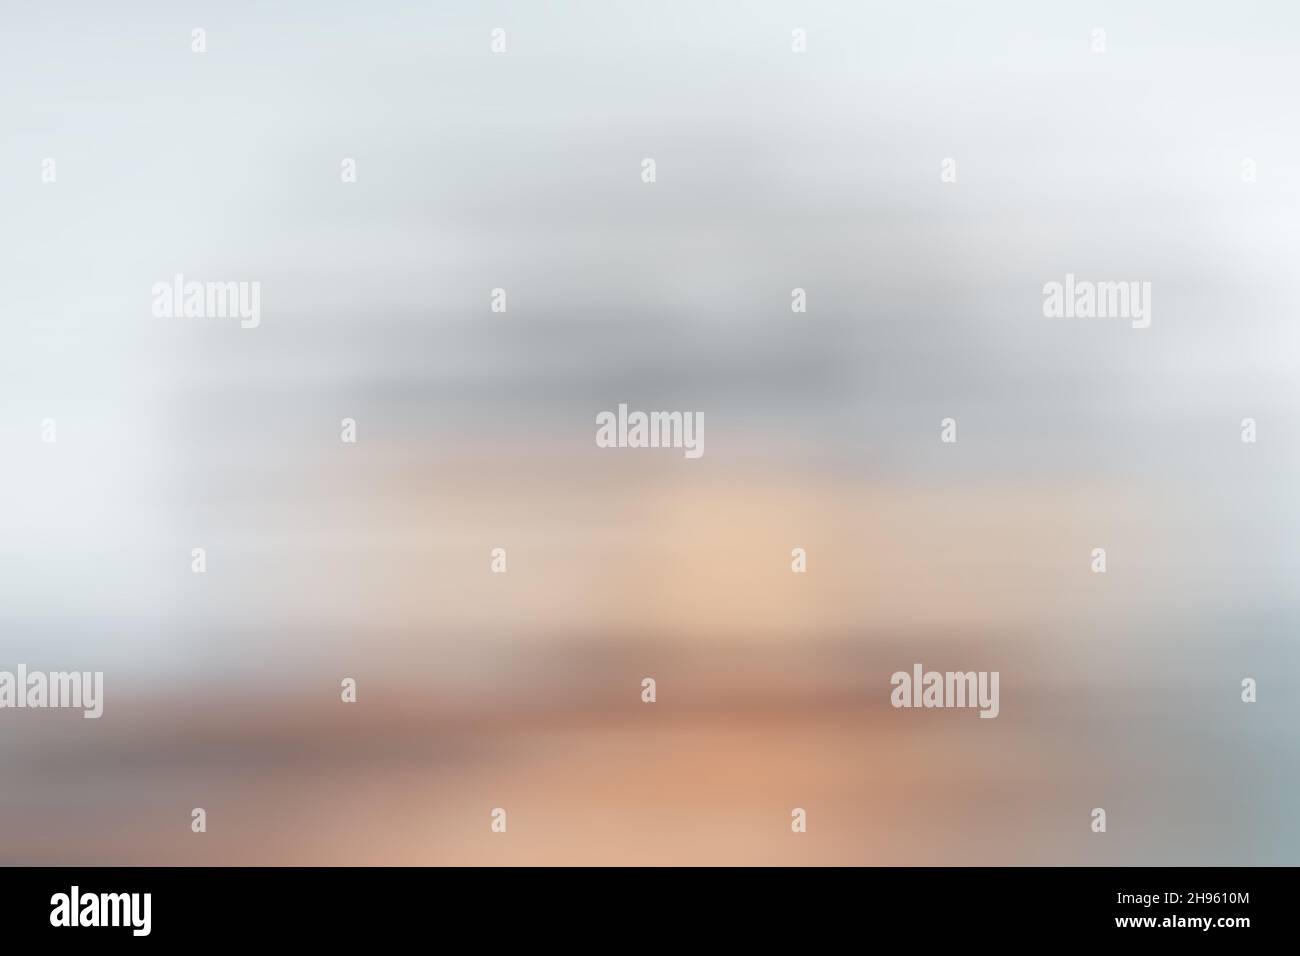 Abstract blurred background, blurred background effect. Stock Photo